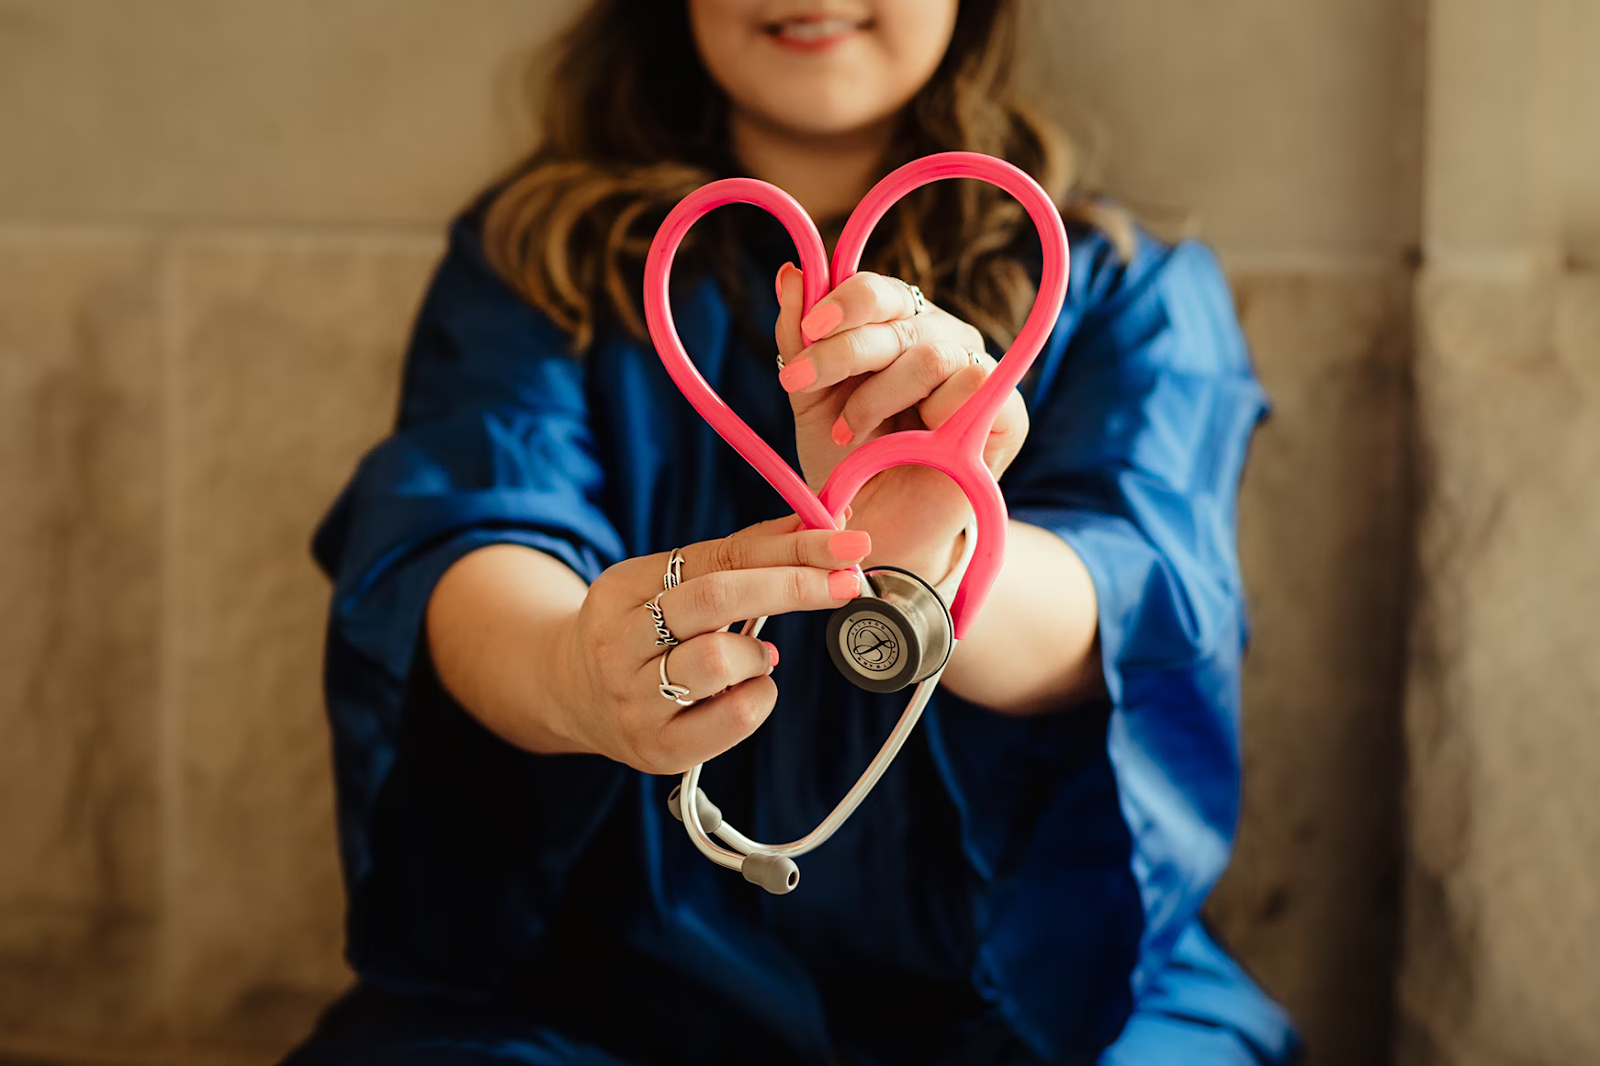 heart shaped stethoscope, health, doctor, kids, parenting, checkup